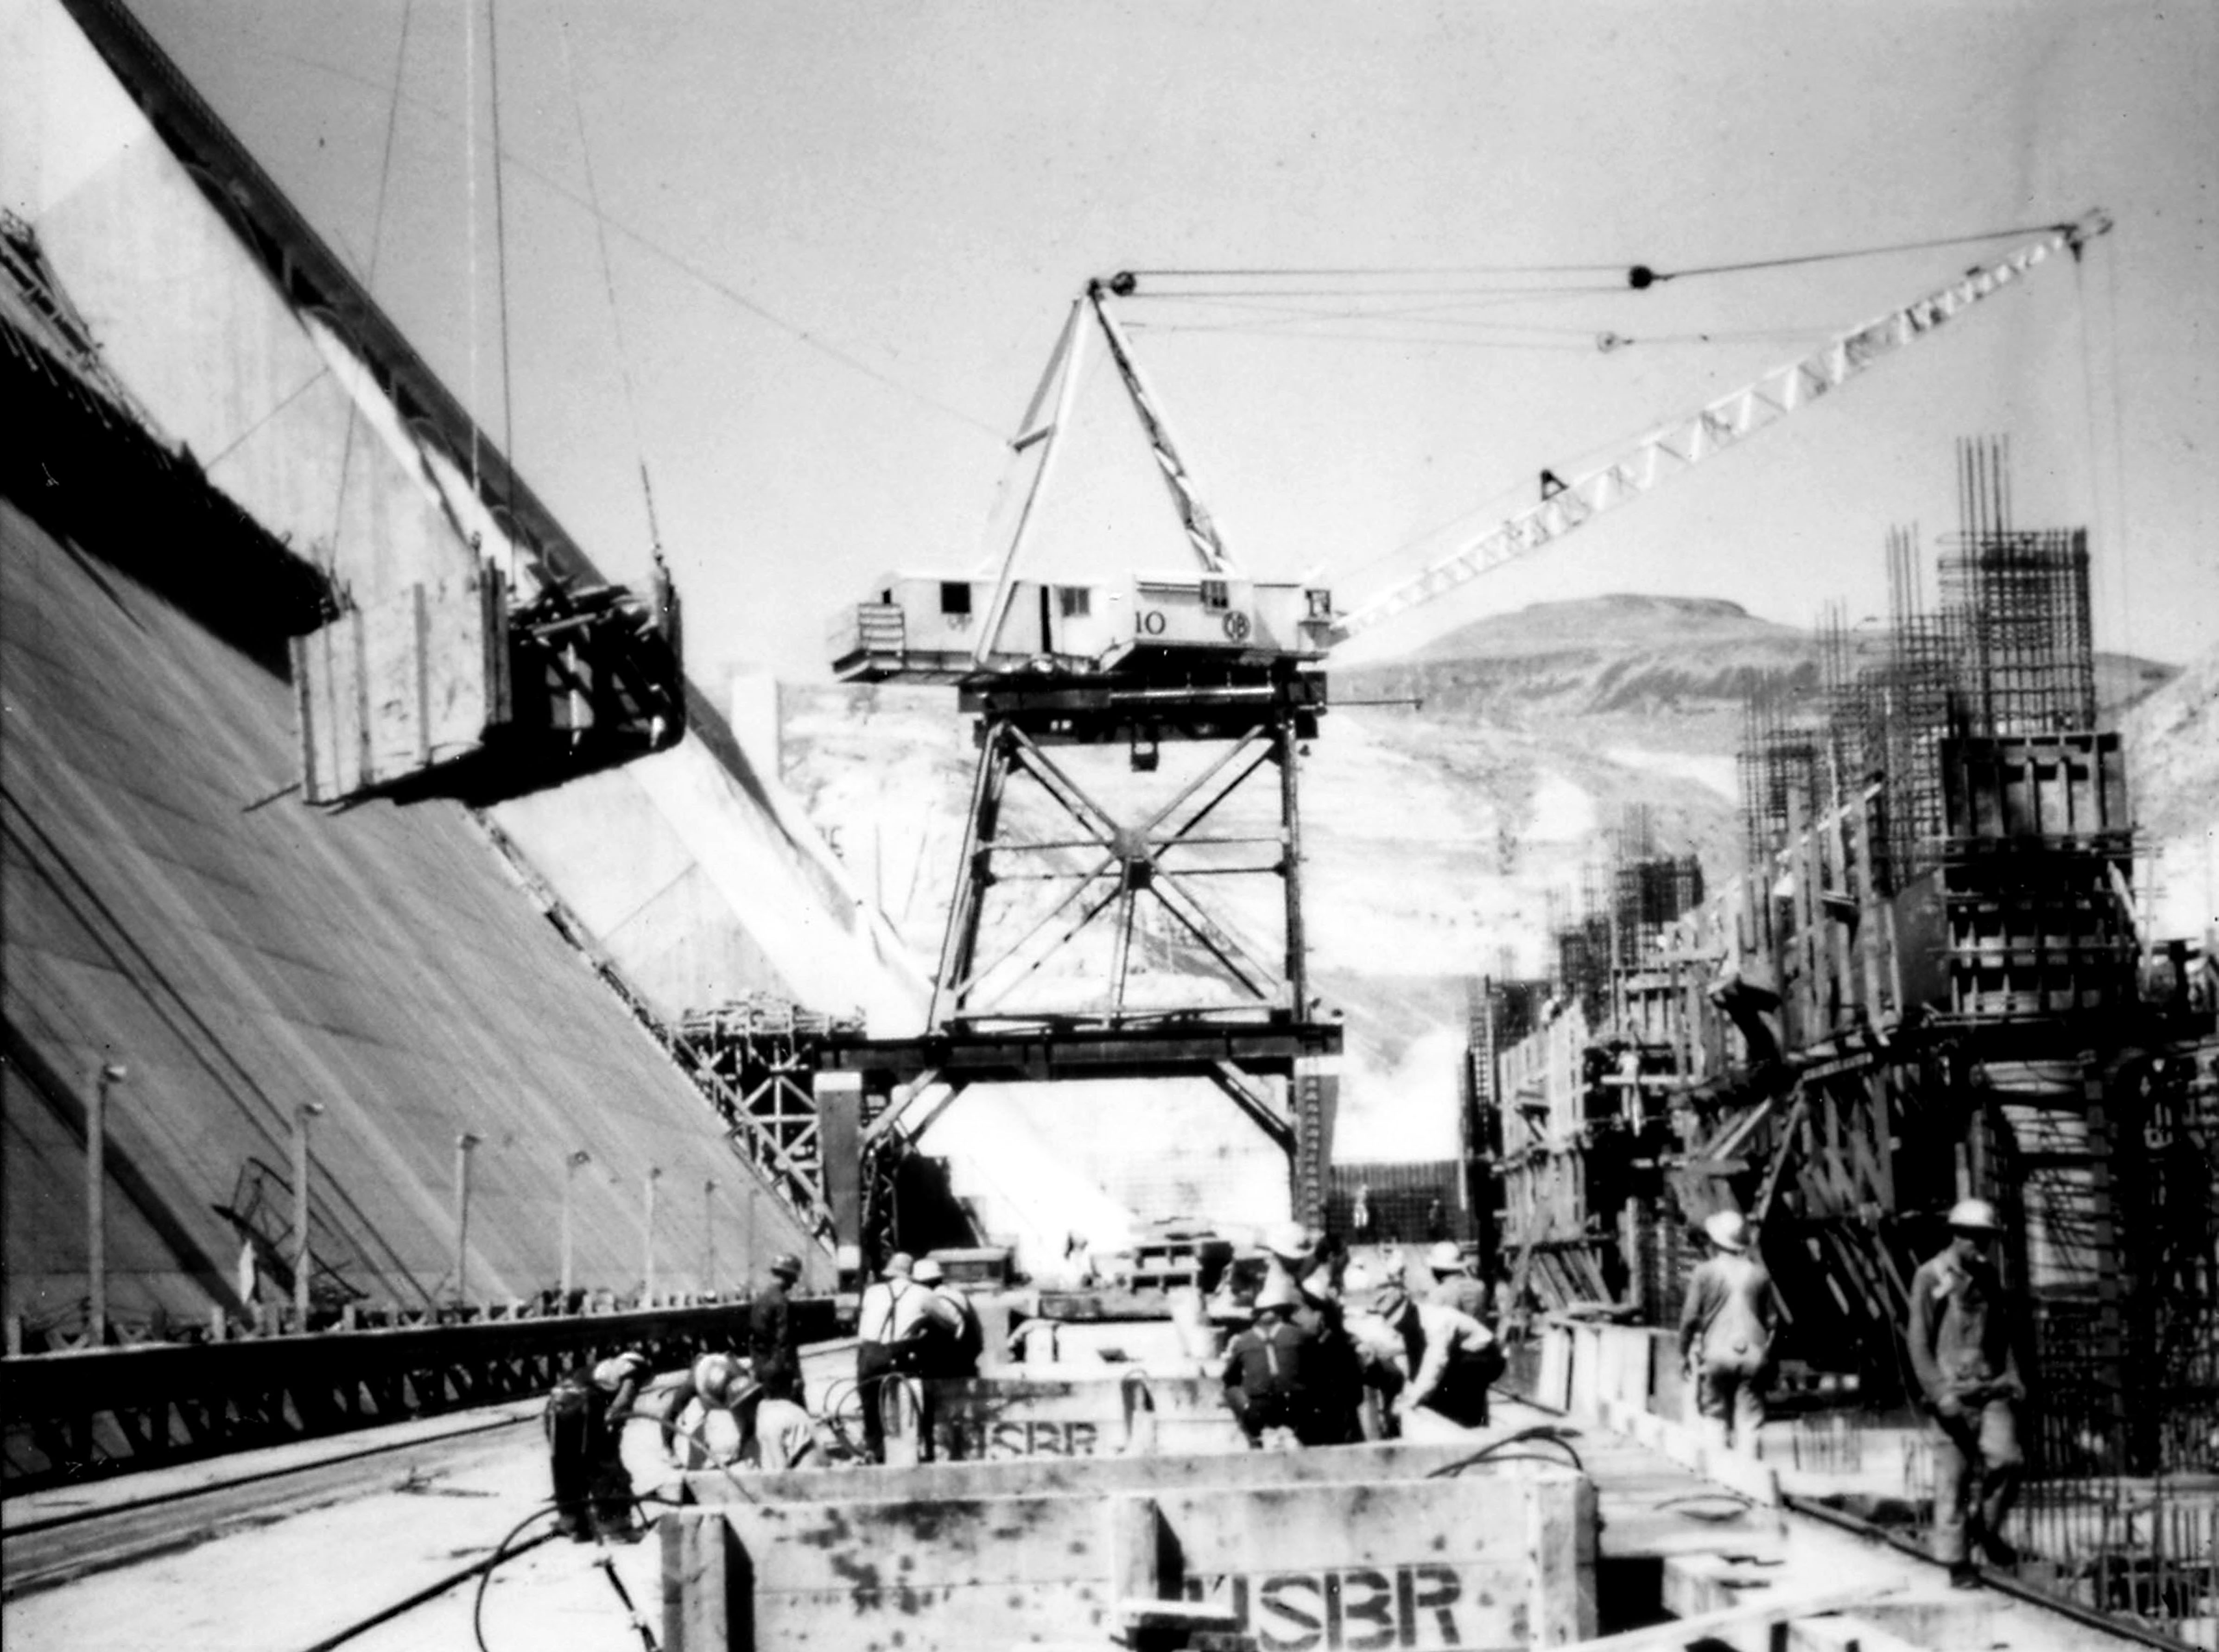 Photo taken July 1942. East side powerhouse work at Grand Coulee Dam.